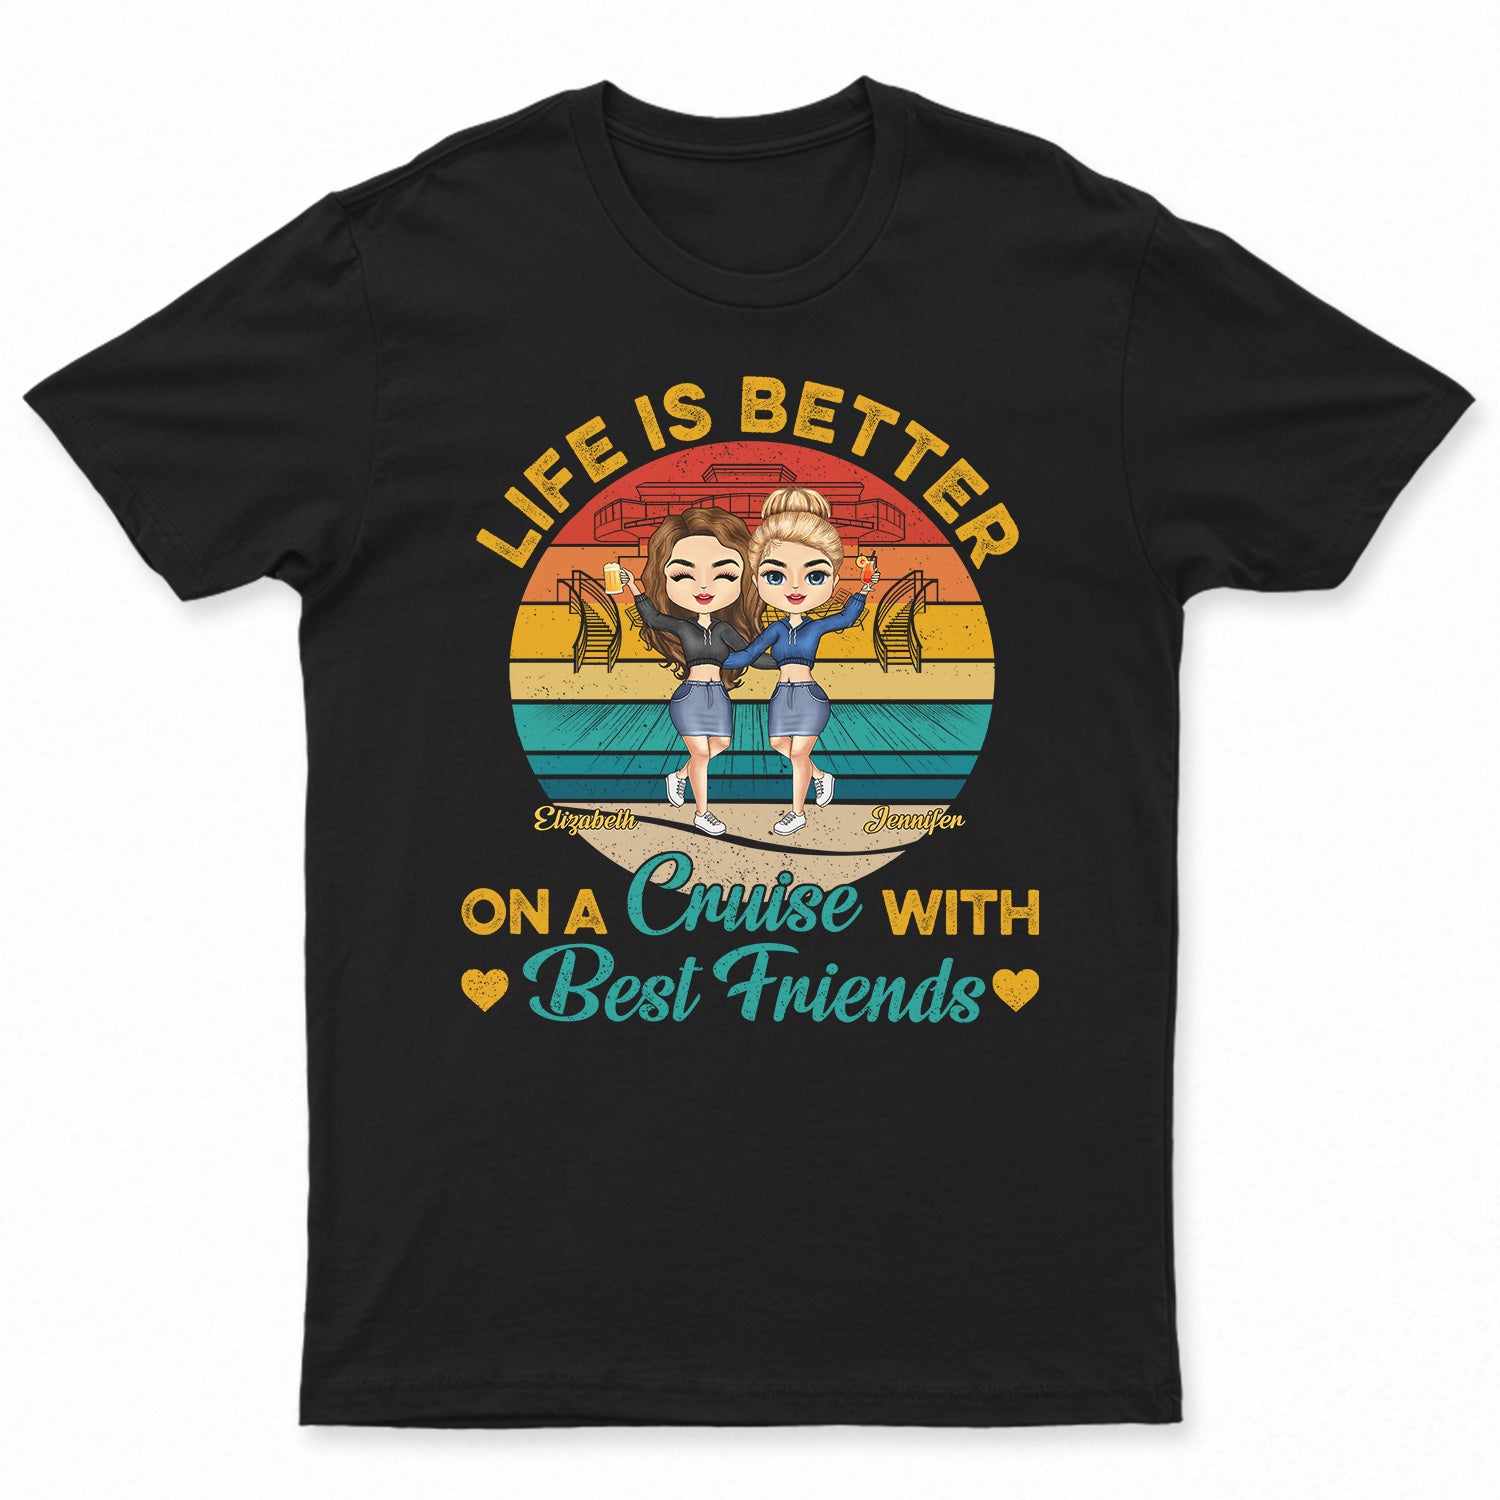 Life Is Better On A Cruise With Best Friends - Birthday, Traveling, Cruising Gift For BFF, Siblings, Colleagues - Personalized Custom T Shirt